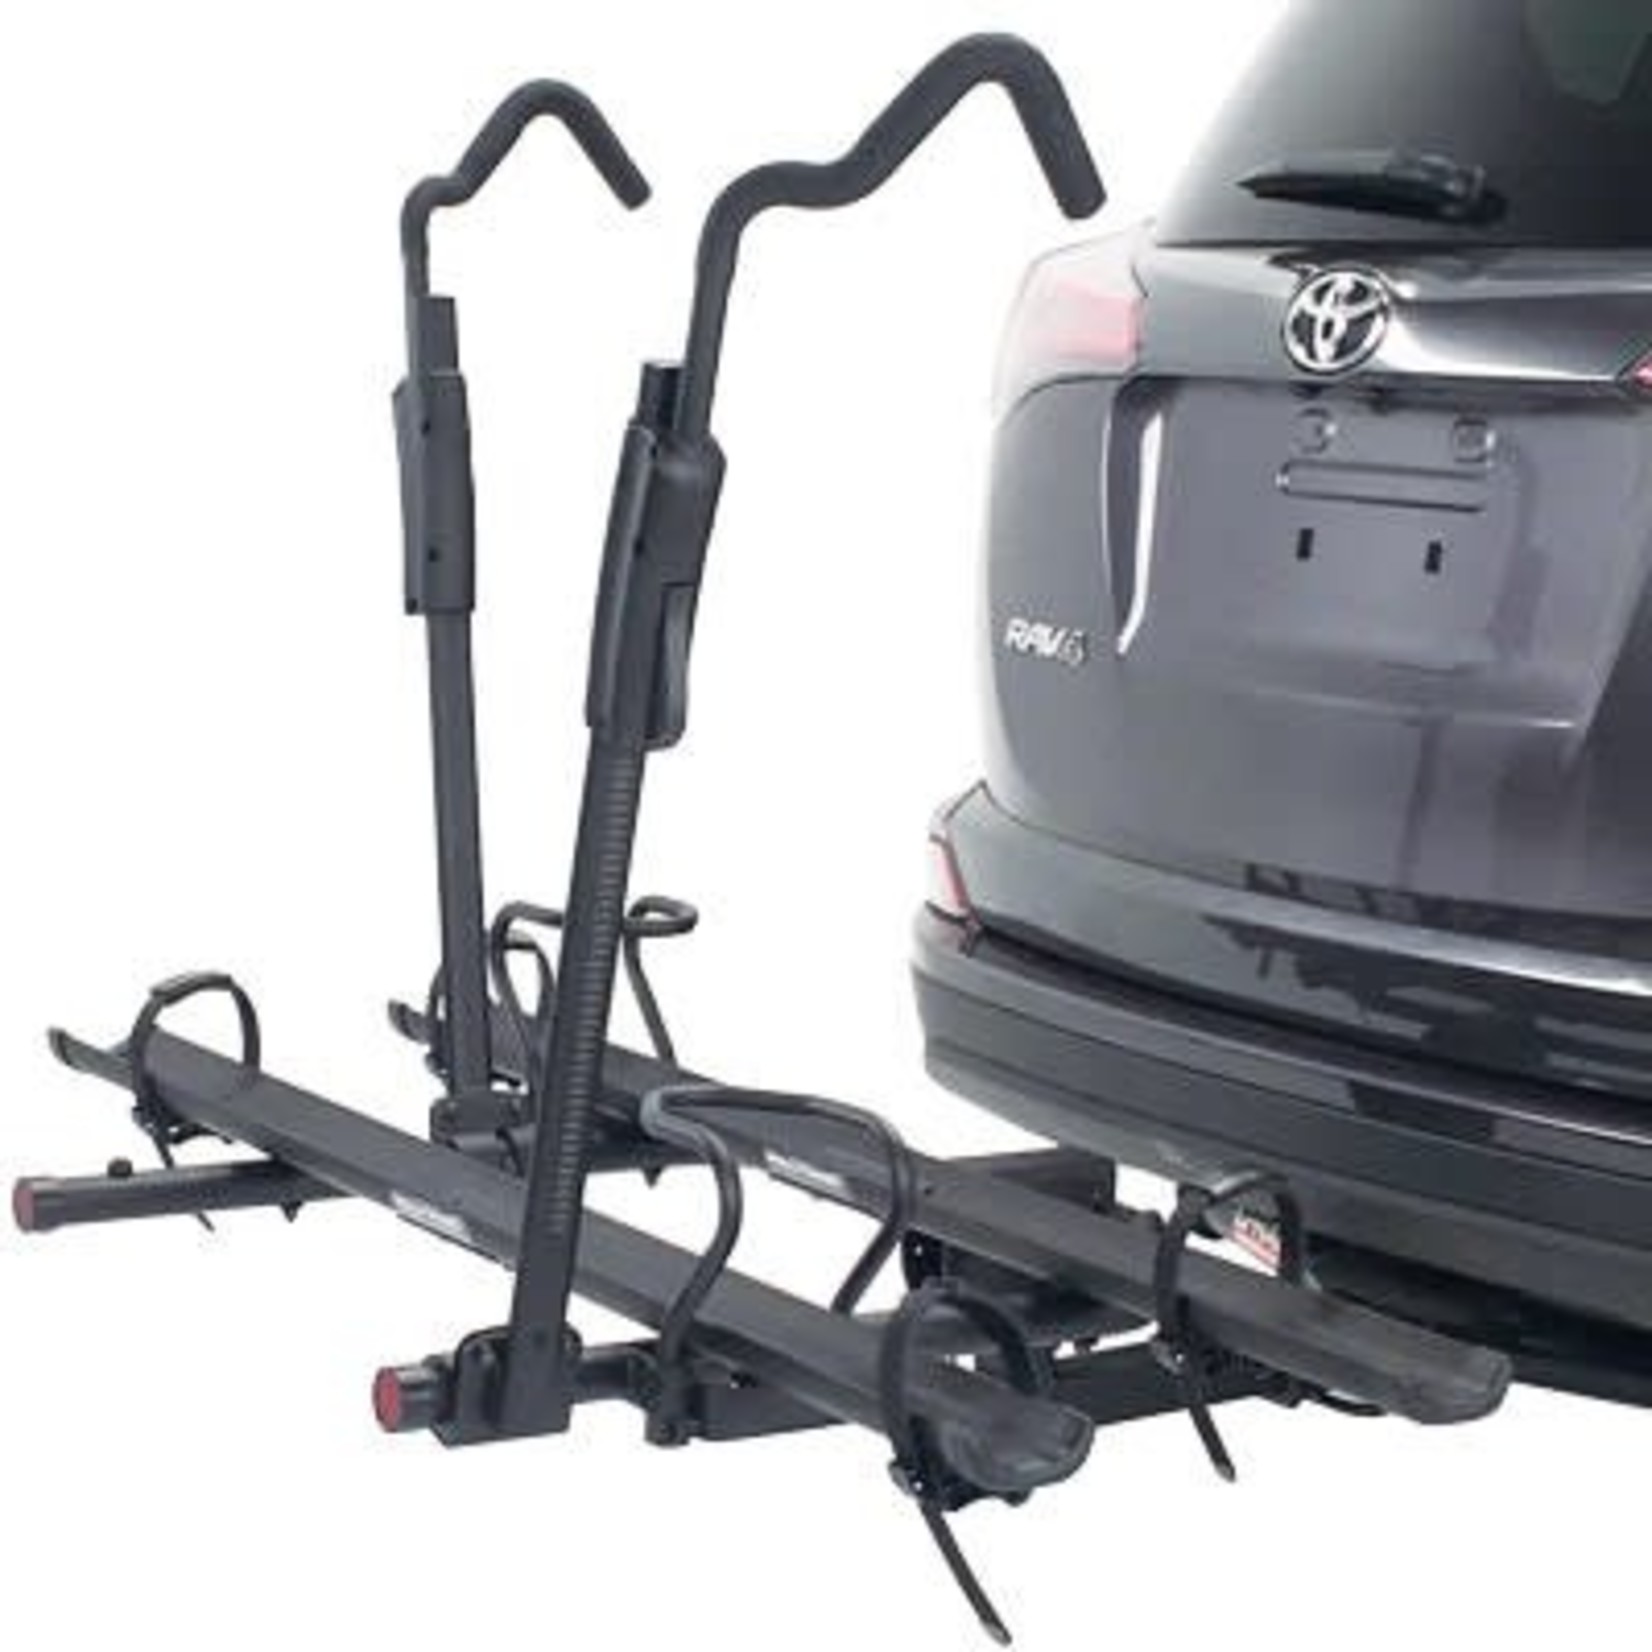 Hollywood H/WOOD TRS HITCH RACK